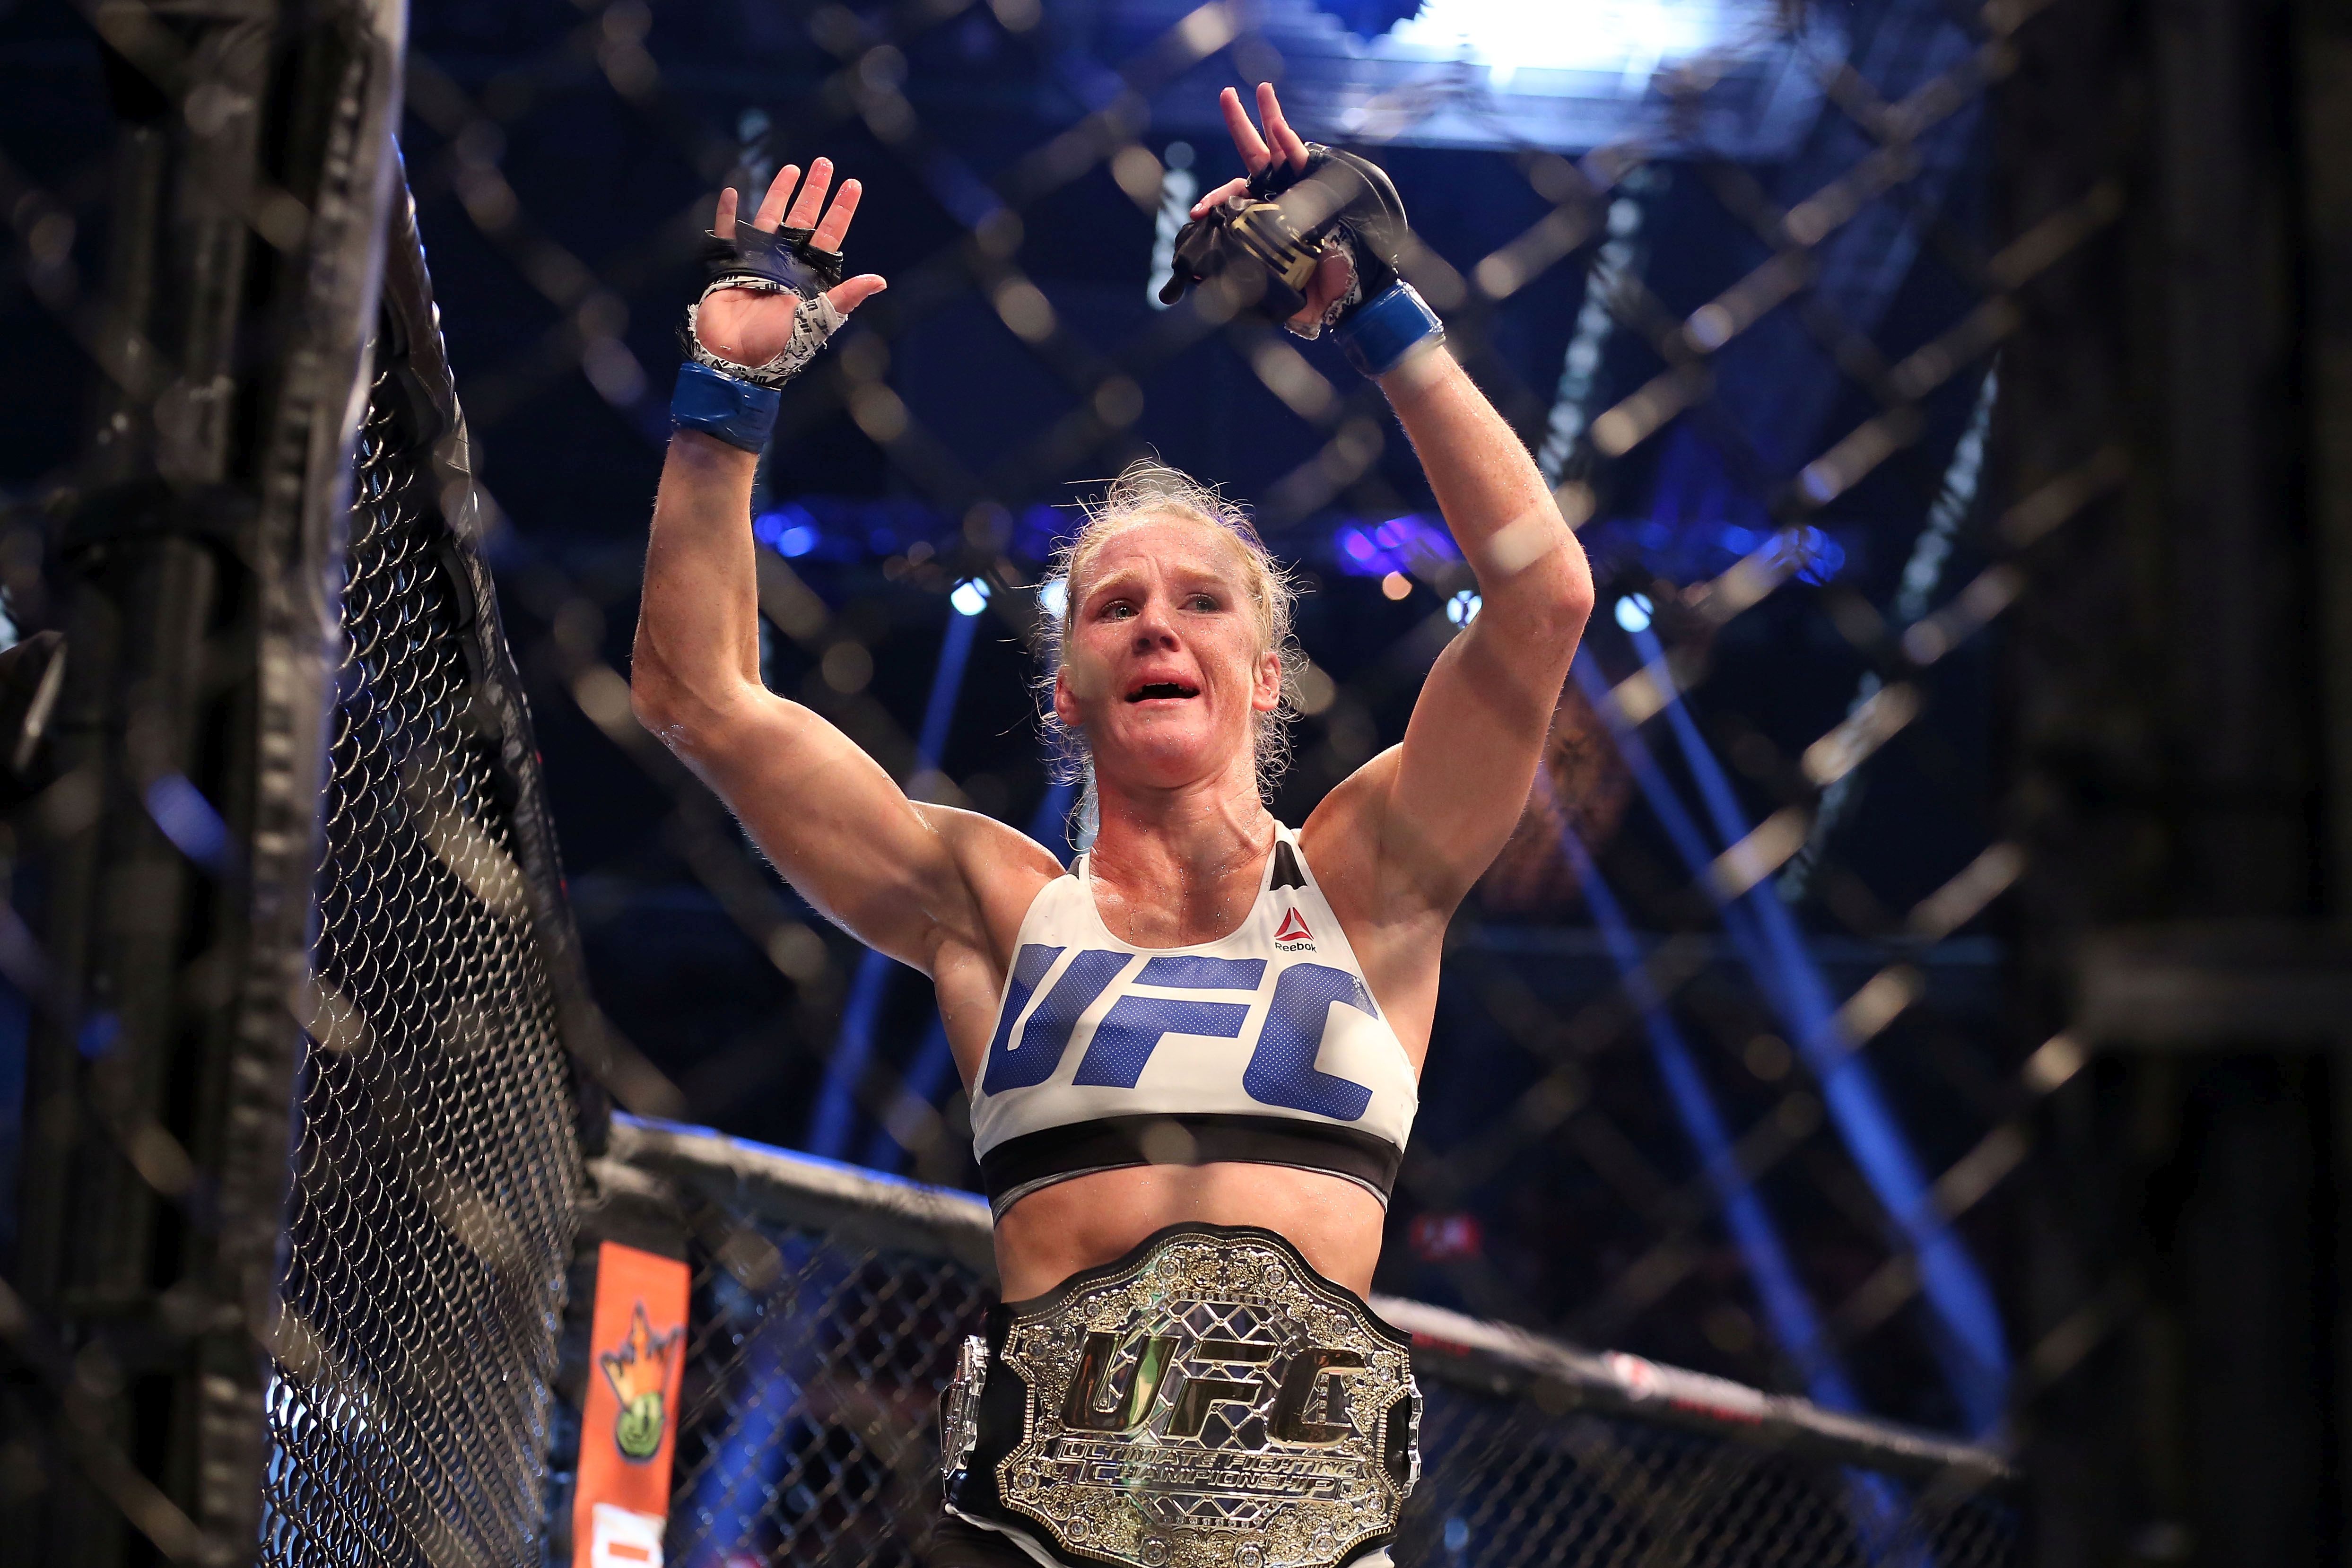 MELBOURNE, AUSTRALIA - NOVEMBER 15: Holly Holm of the United States celebrates victory over Ronda Rousey of the United States in their UFC women's bantamweight championship bout during the UFC 193 event at Etihad Stadium on November 15, 2015 in Melbourne, Australia. (Photo by Quinn Rooney/Getty Images)